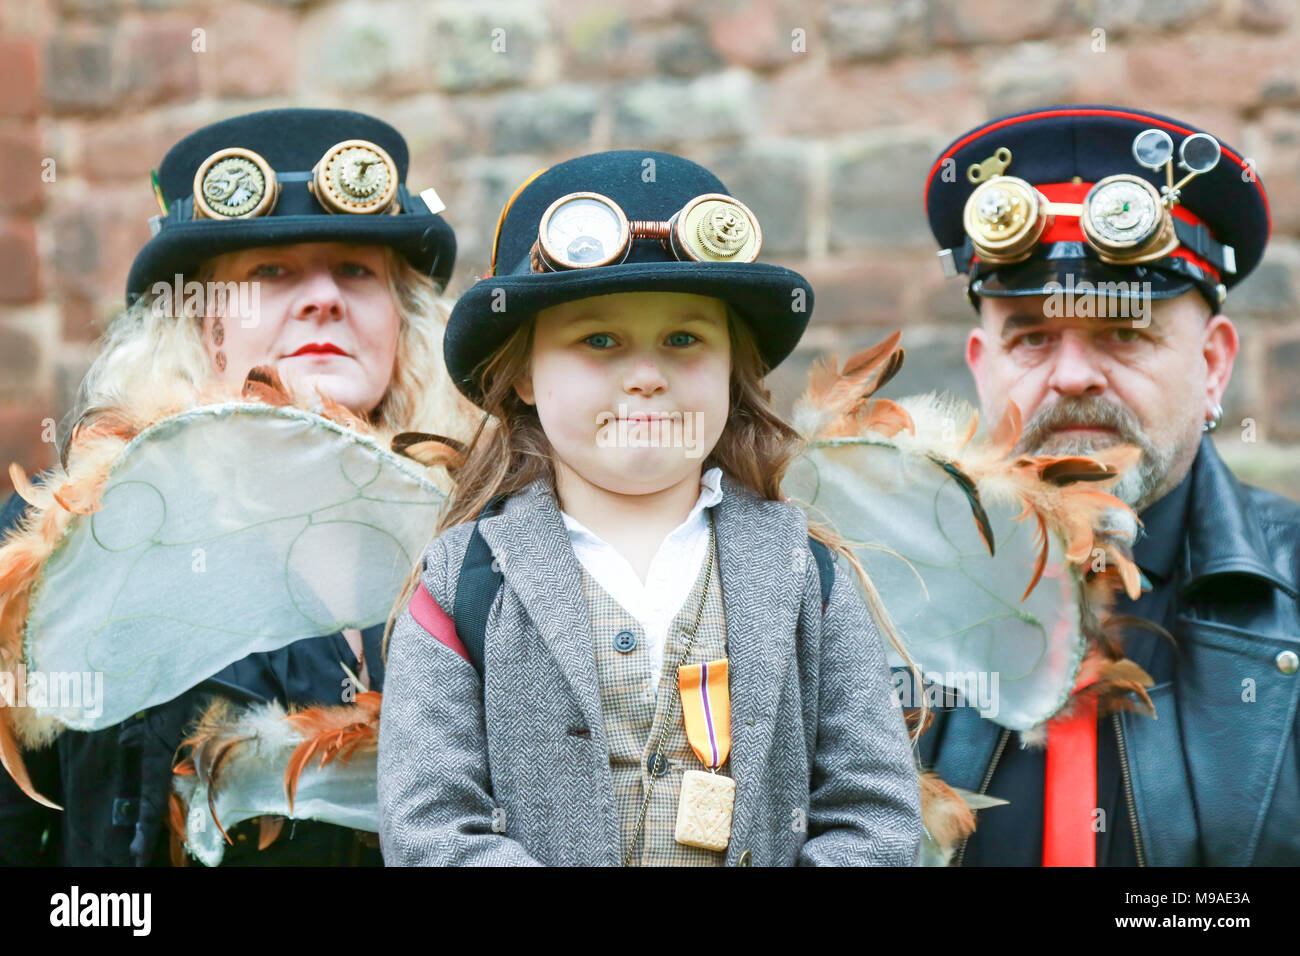 Young girl aged six 6 with her grandparents wearing steampunk clothing. Steampunk is a style of fashion that combines historical elements and anachronistic technology, often inspired by Edwardian science fiction. Stock Photo